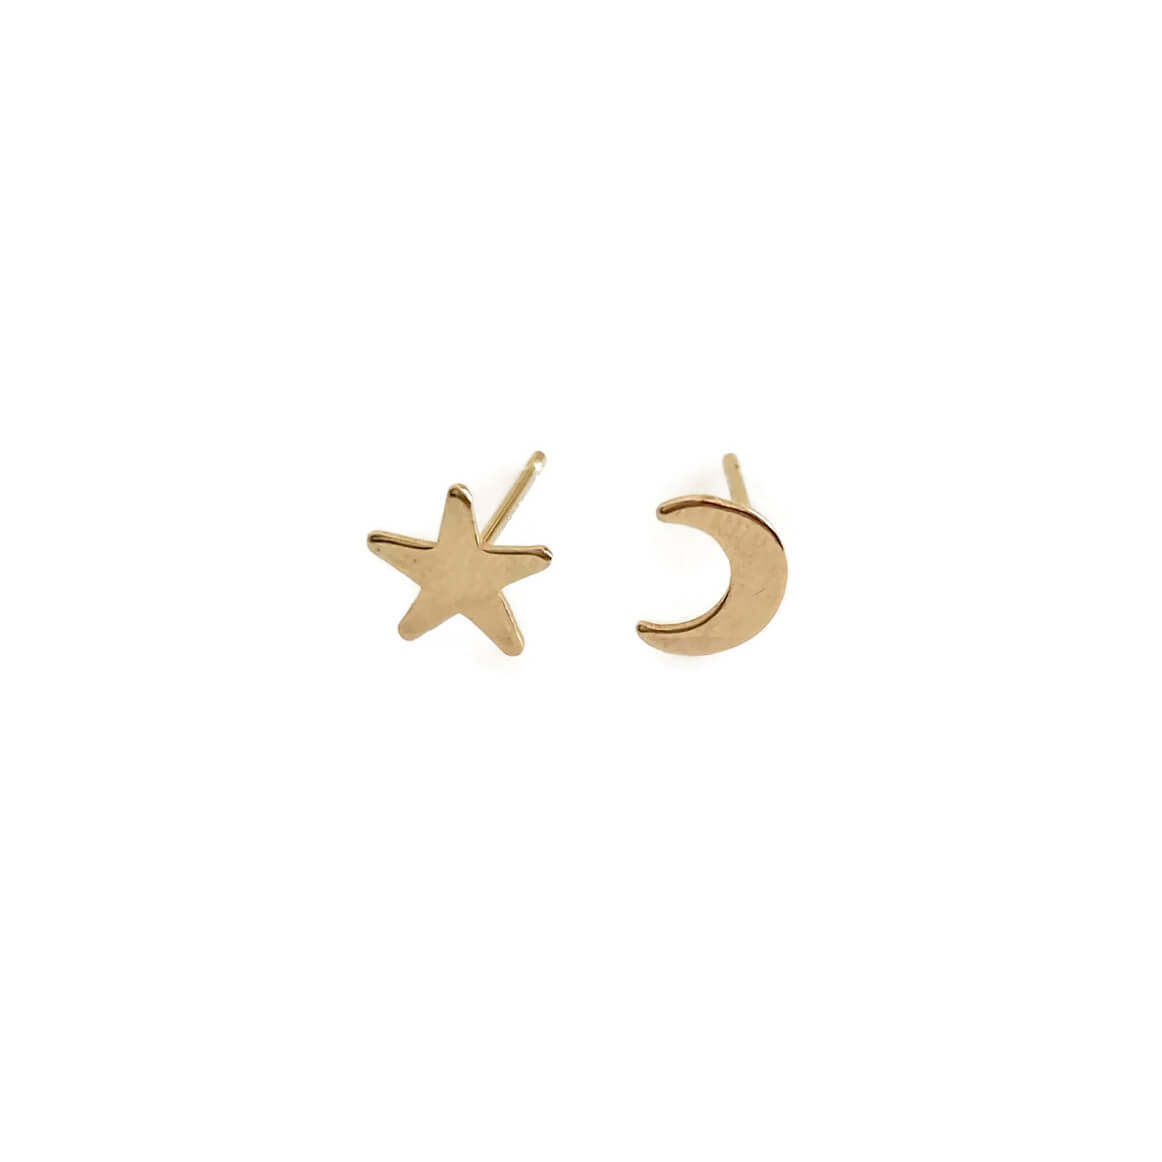 This mismatched moon and star stud earrings are made of solid 14k gold. The moon is a crescent moon shape mismatches with the single star stud.  The two make it a fun pair of gold stud earrings. 